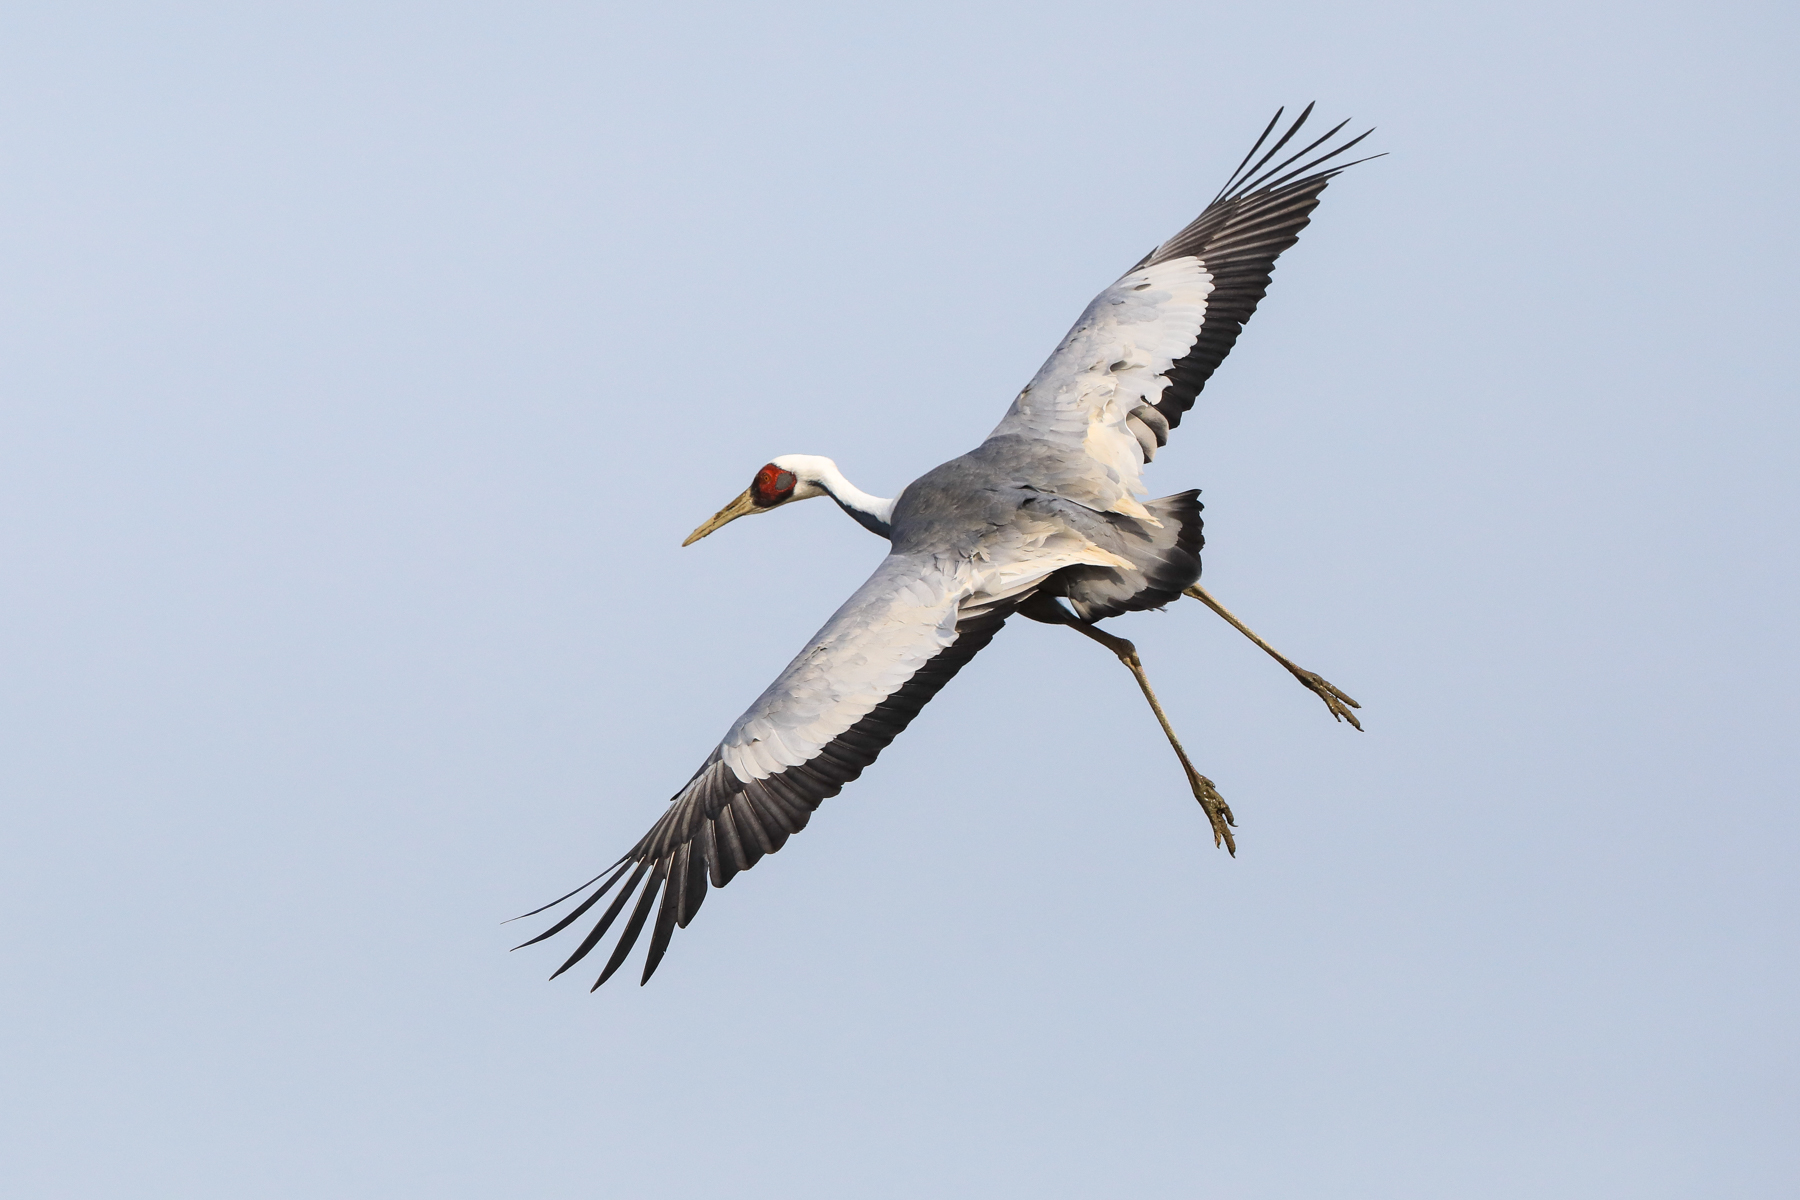 An adult White-naped Crane comes in to land at Arasaki